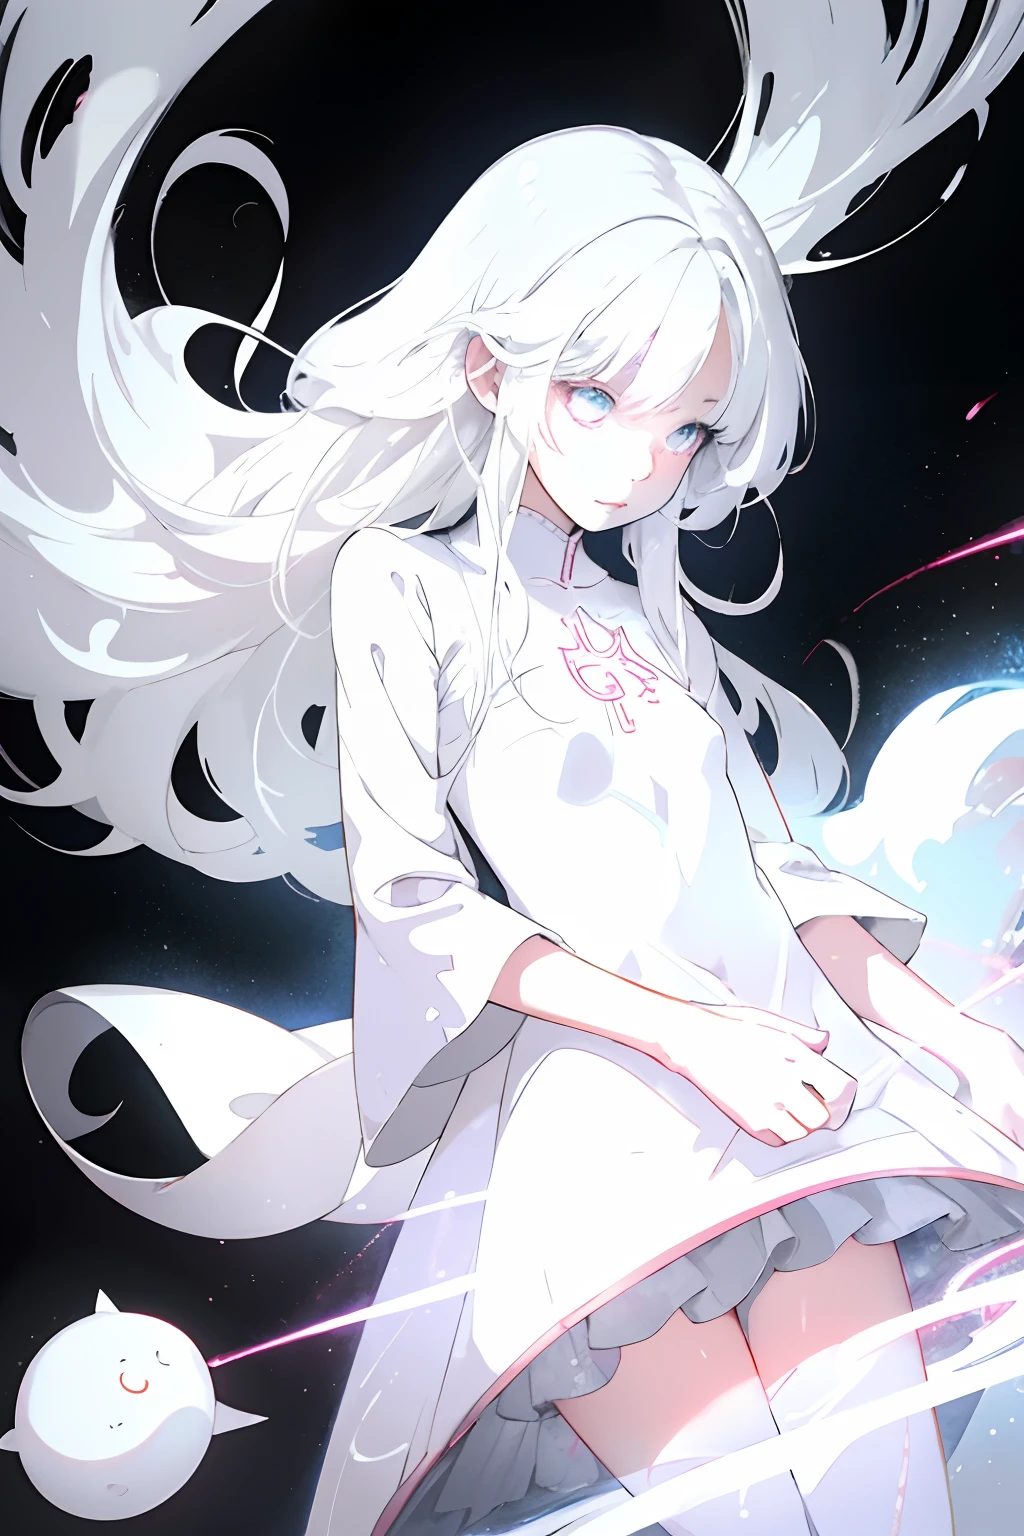 white  hair,ethereal anime,  White Cat Girl,Pale Young Ghost Girl, demon anime girl, Glowing white eyes, Fuzzy Ghost, soft anime illustration, with white long hair, 2 d anime style,  2d art cover,  dreamy psychedelic anime,  anime abstract art,Detailed key anime art